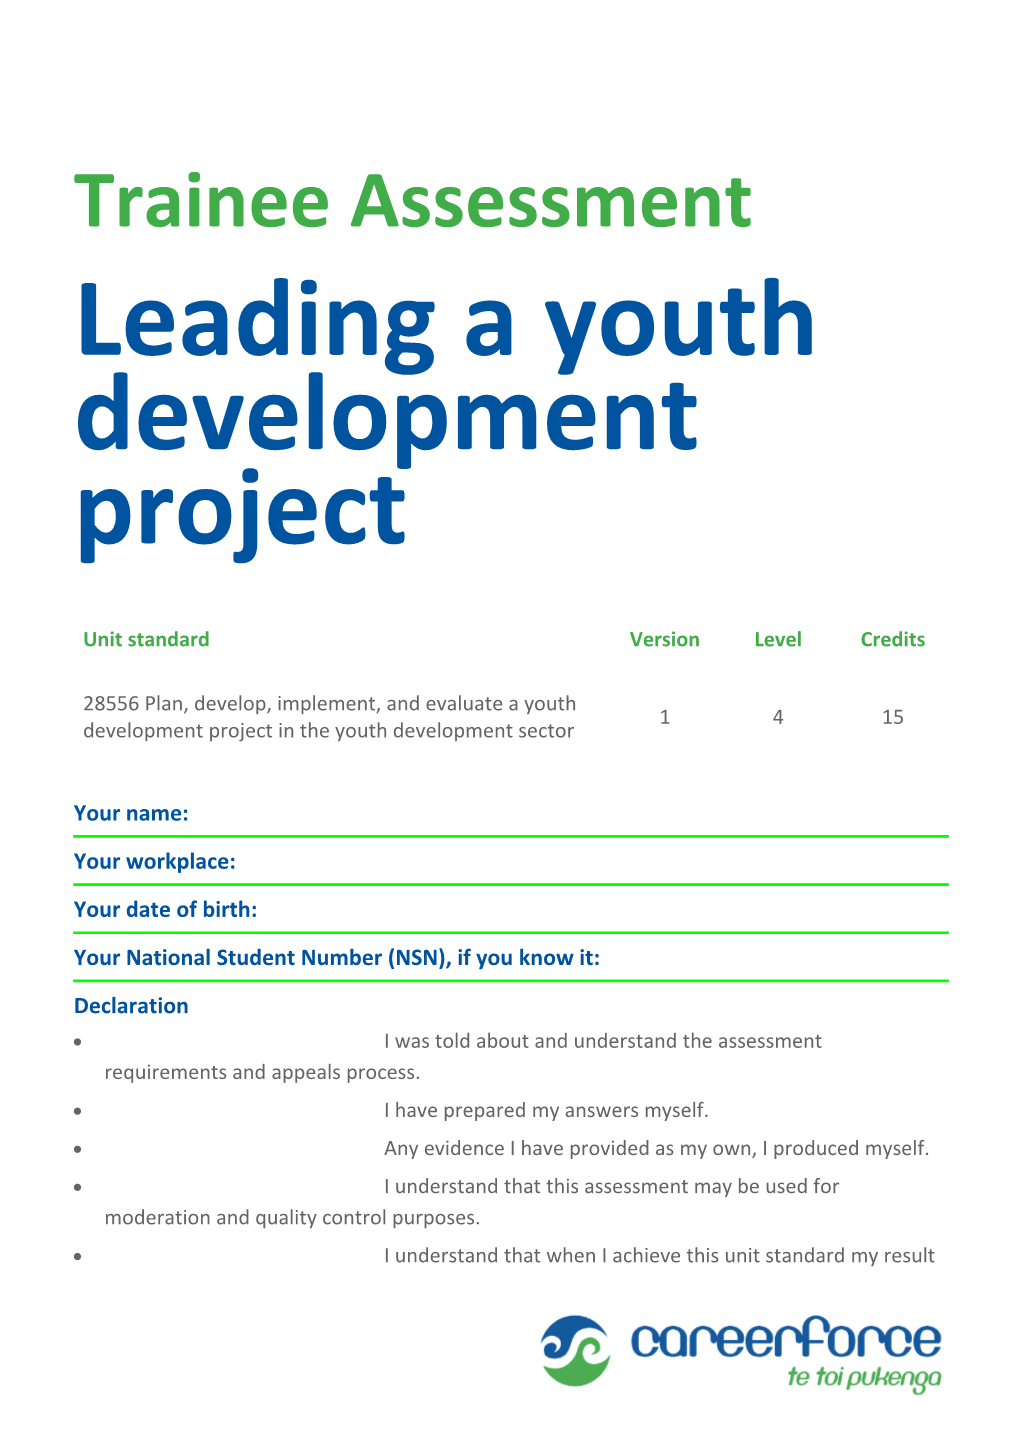 Leading a Youth Development Project